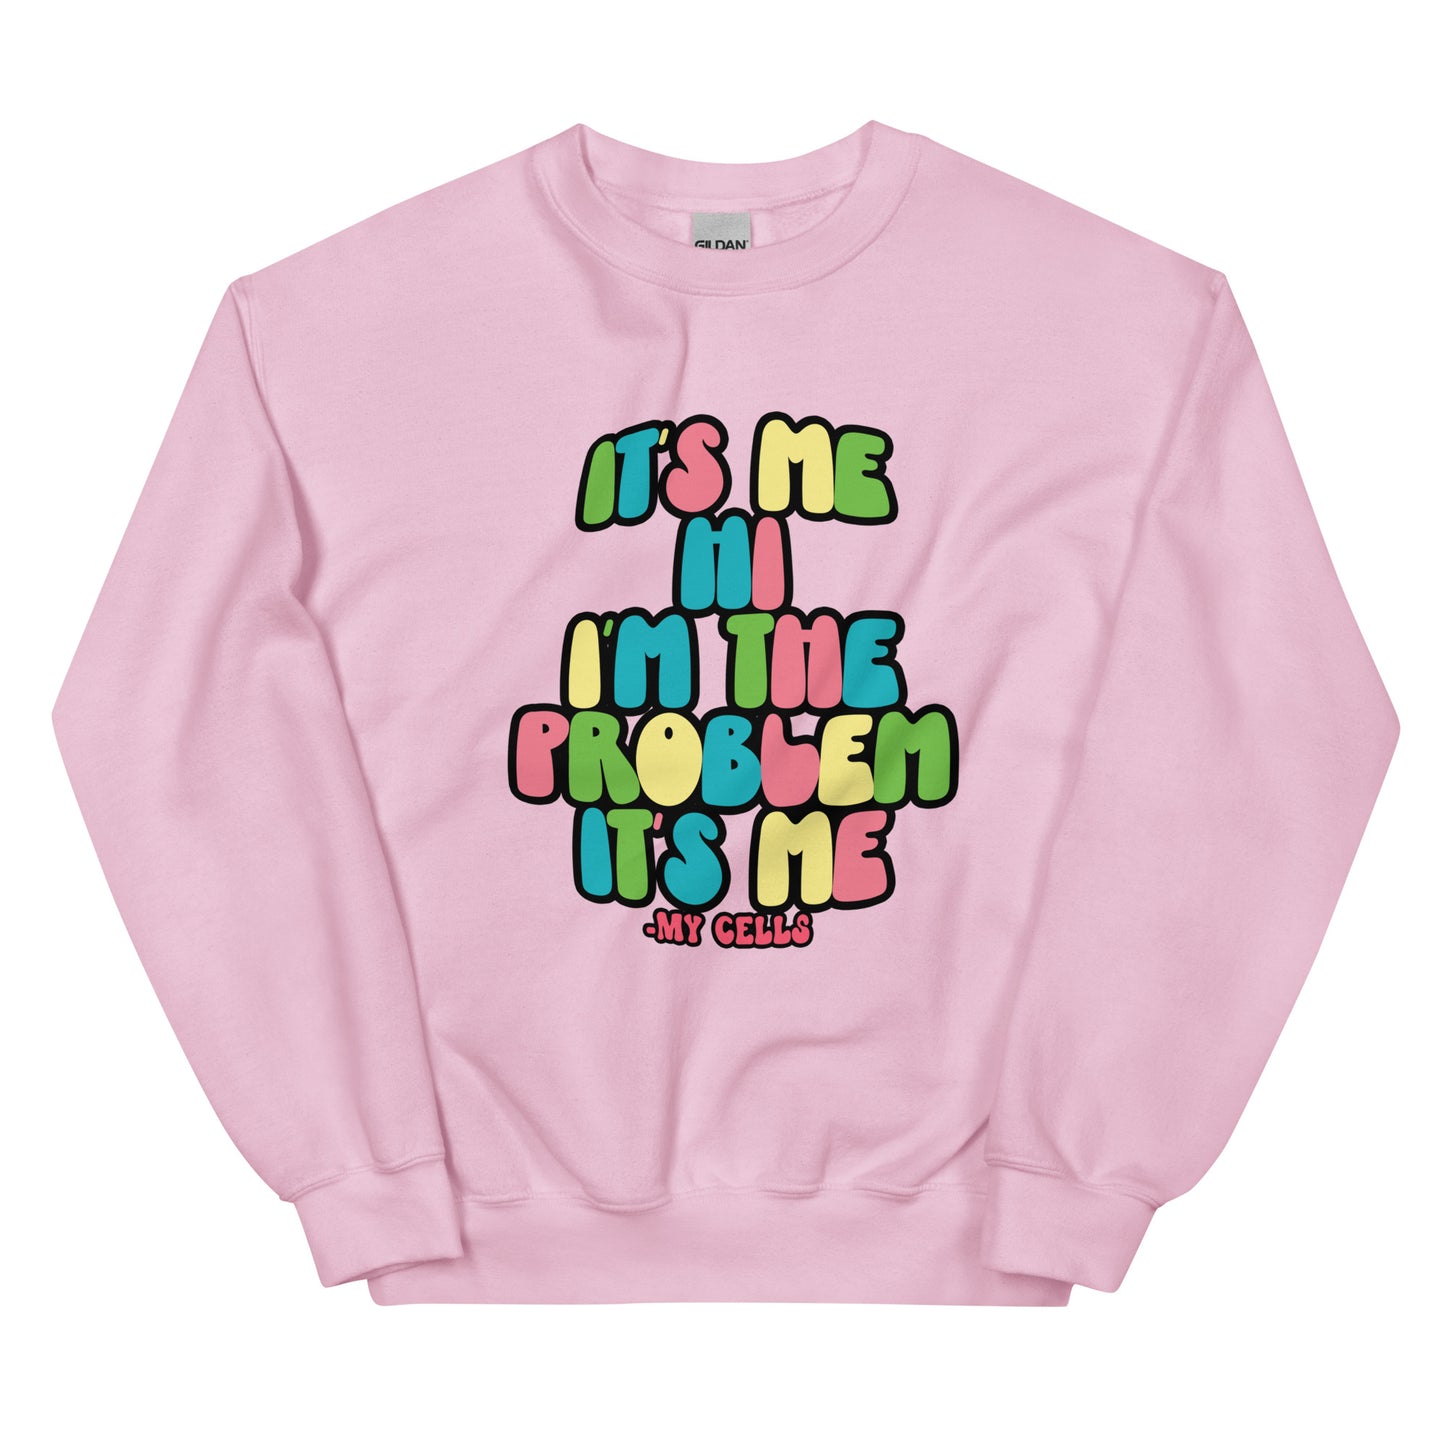 My Cells Are The Problem Sweatshirt